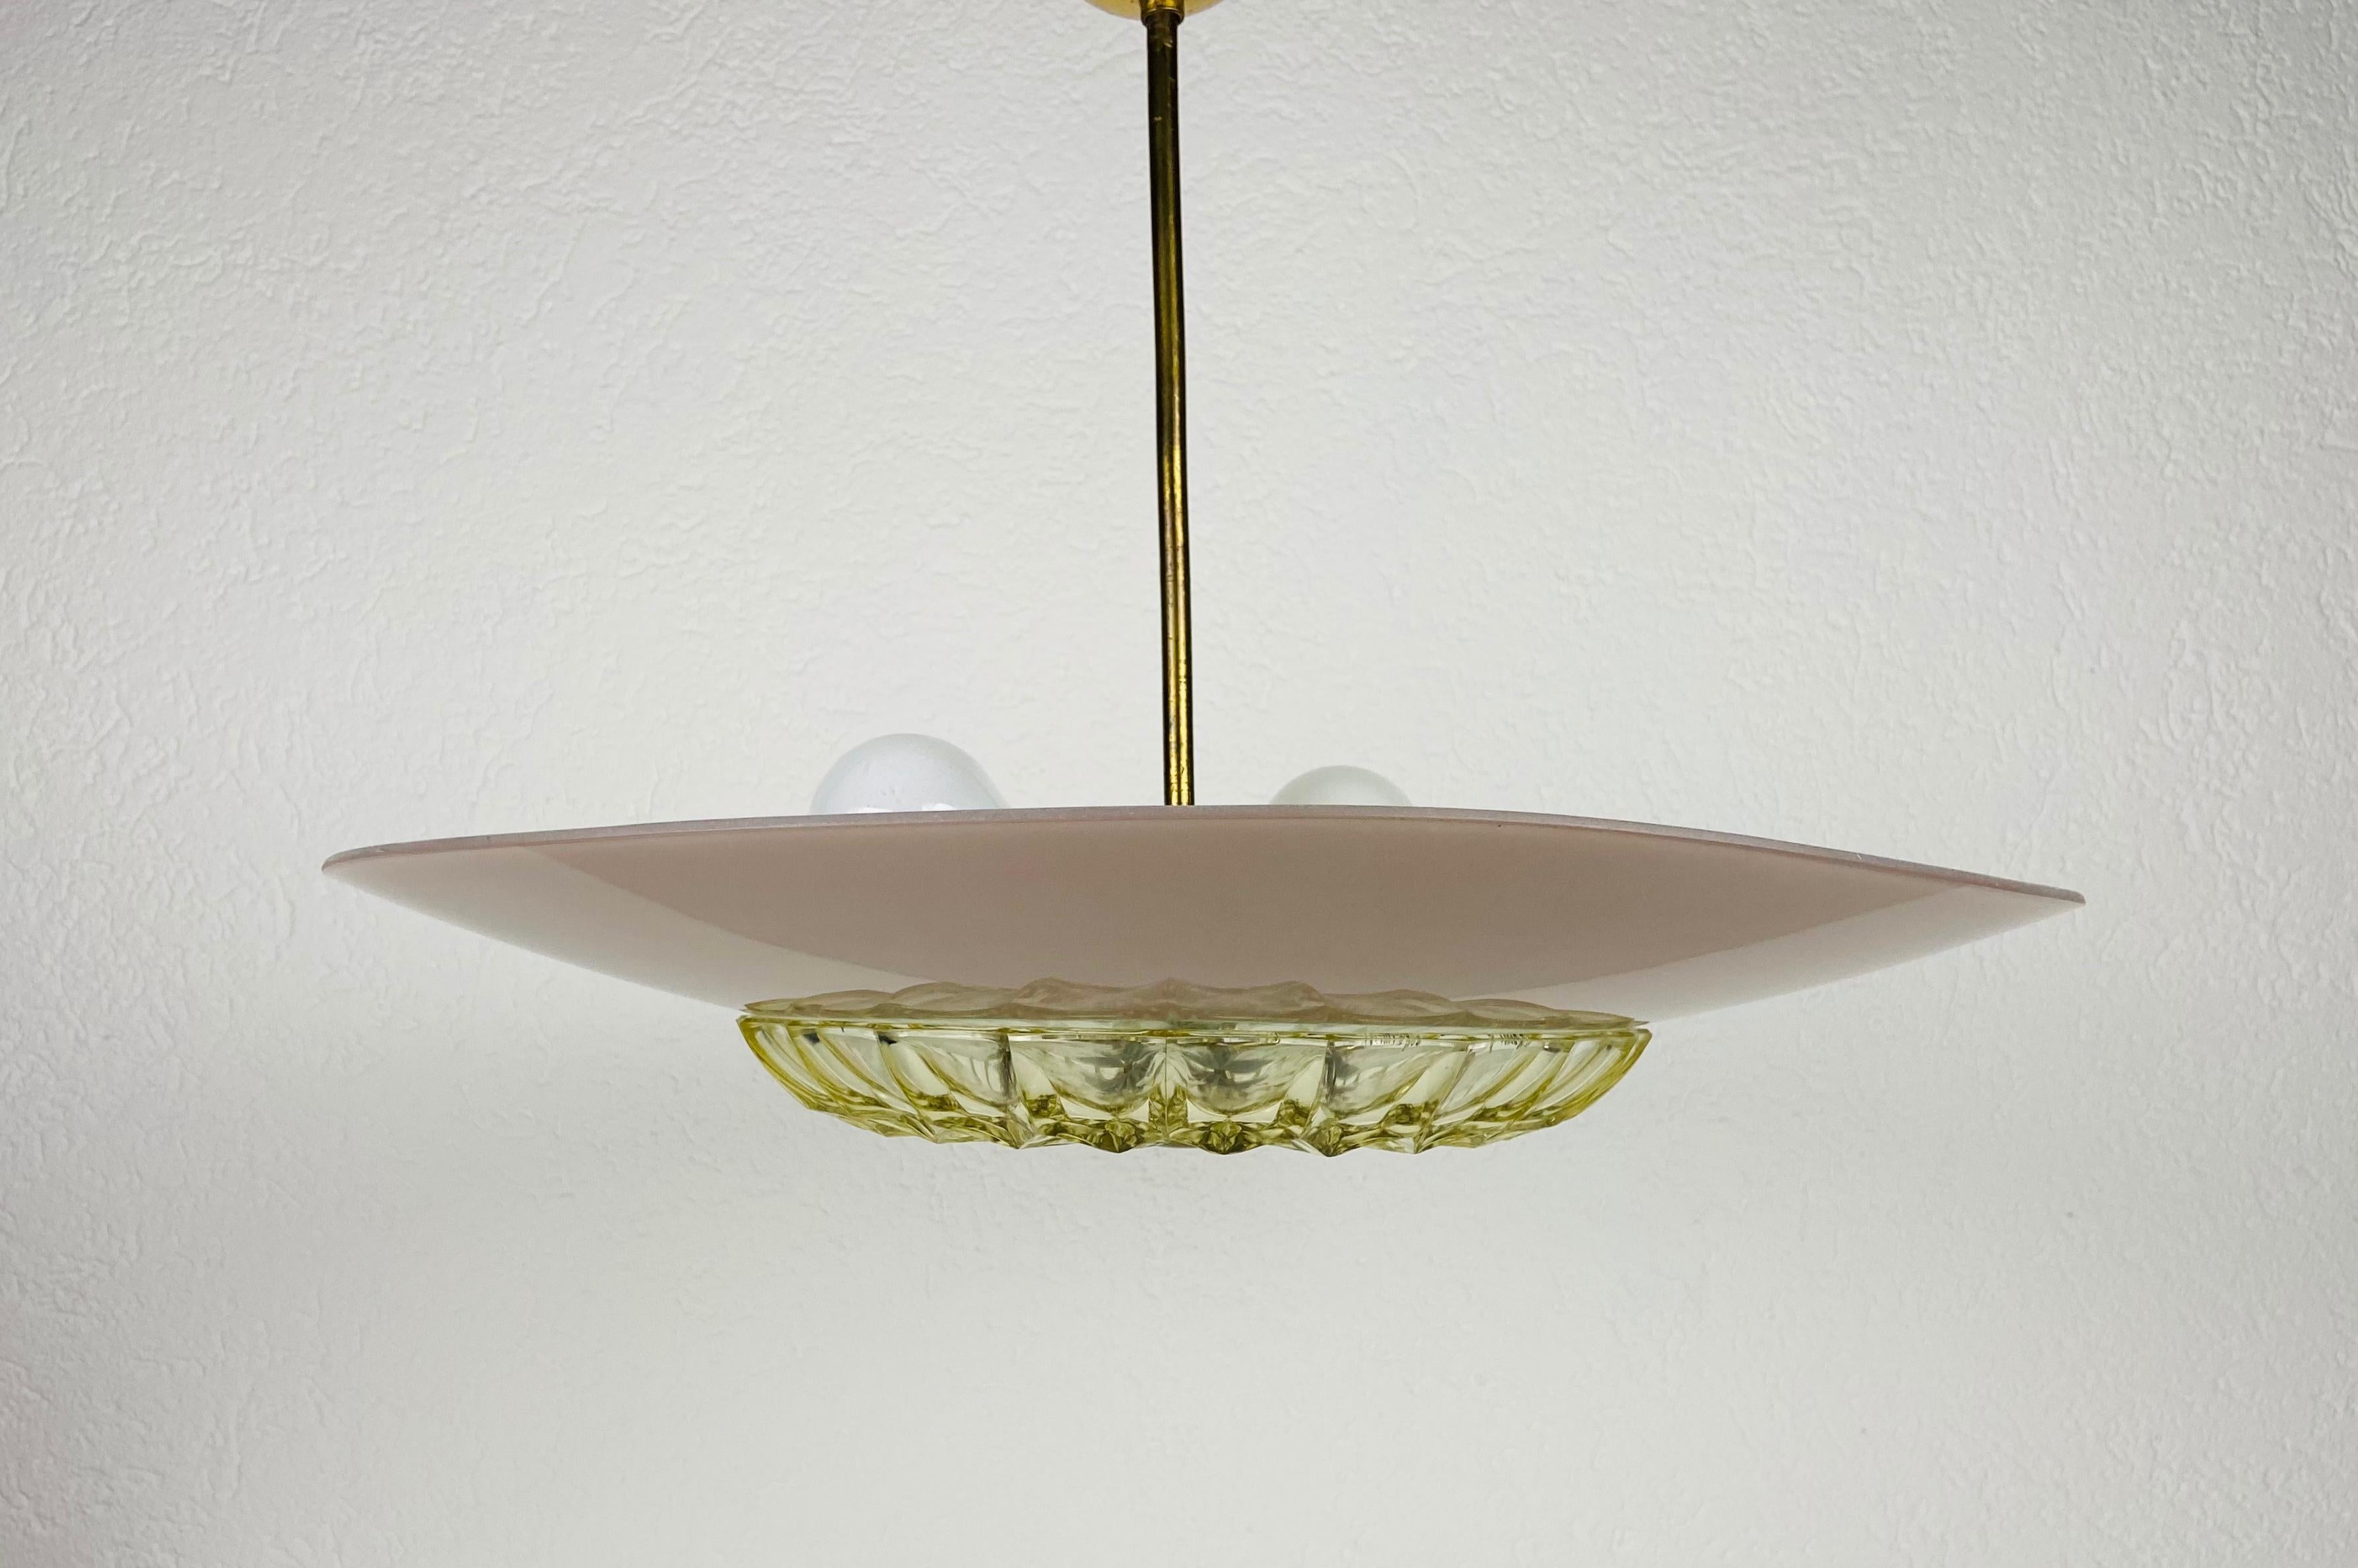 Mid-Century Modern pendant lamp in the style of Boris Lacroix made in the 1960s. The shade is made of glass and the bar is made of brass.

The light requires two E27 (US E26) light bulbs. Good vintage condition.

Free worldwide express shipping.